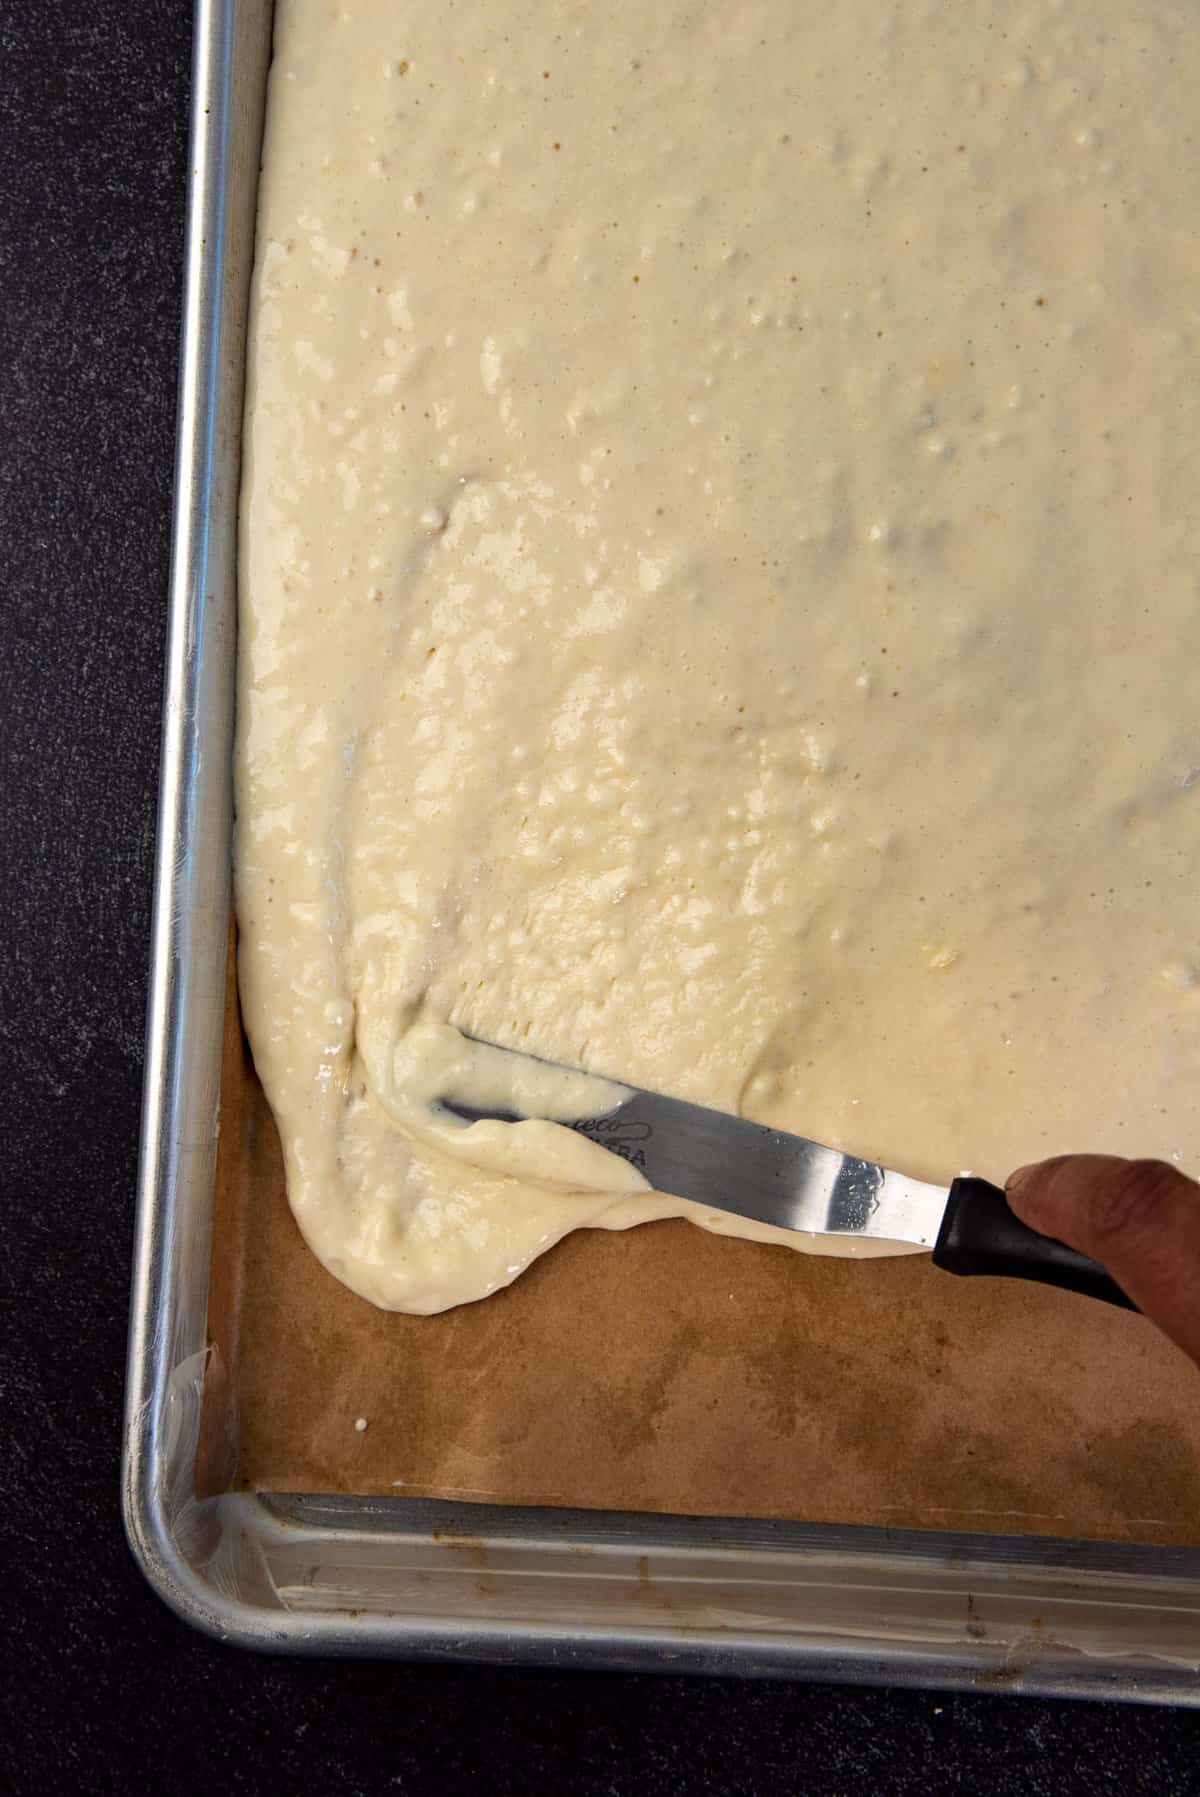 A close up of the pancake batter being spread in the half sheet pan using a small spatula.